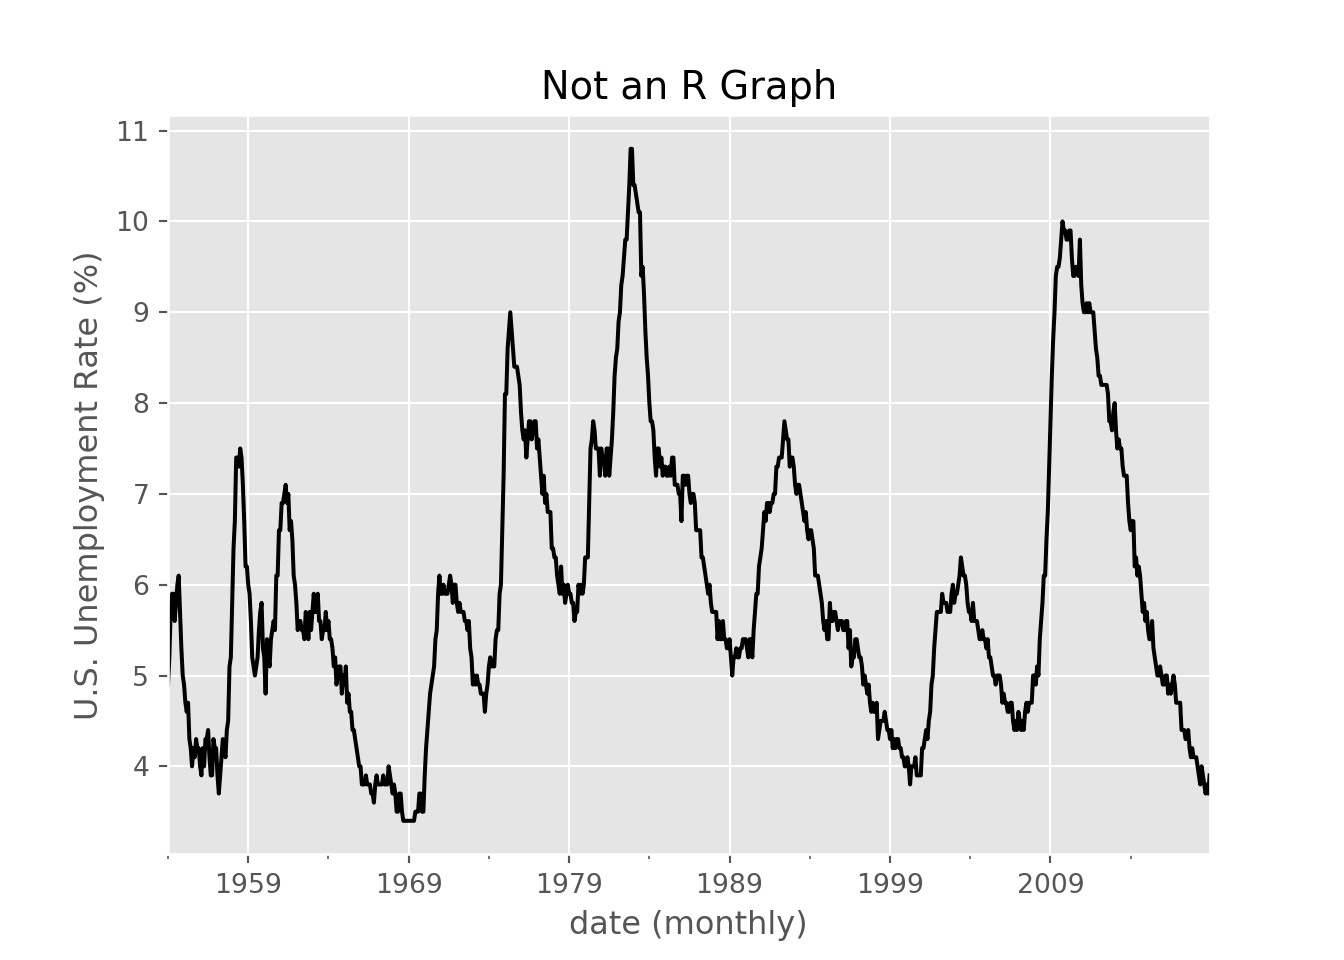 \label{fig:figs}Made with Python matplotlib. Data Source: U.S. Bureau of Labor Statistics, Civilian Unemployment Rate [UNRATE], retrieved from FRED, Federal Reserve Bank of St. Louis; https://fred.stlouisfed.org/series/UNRATE, January 28, 2019.